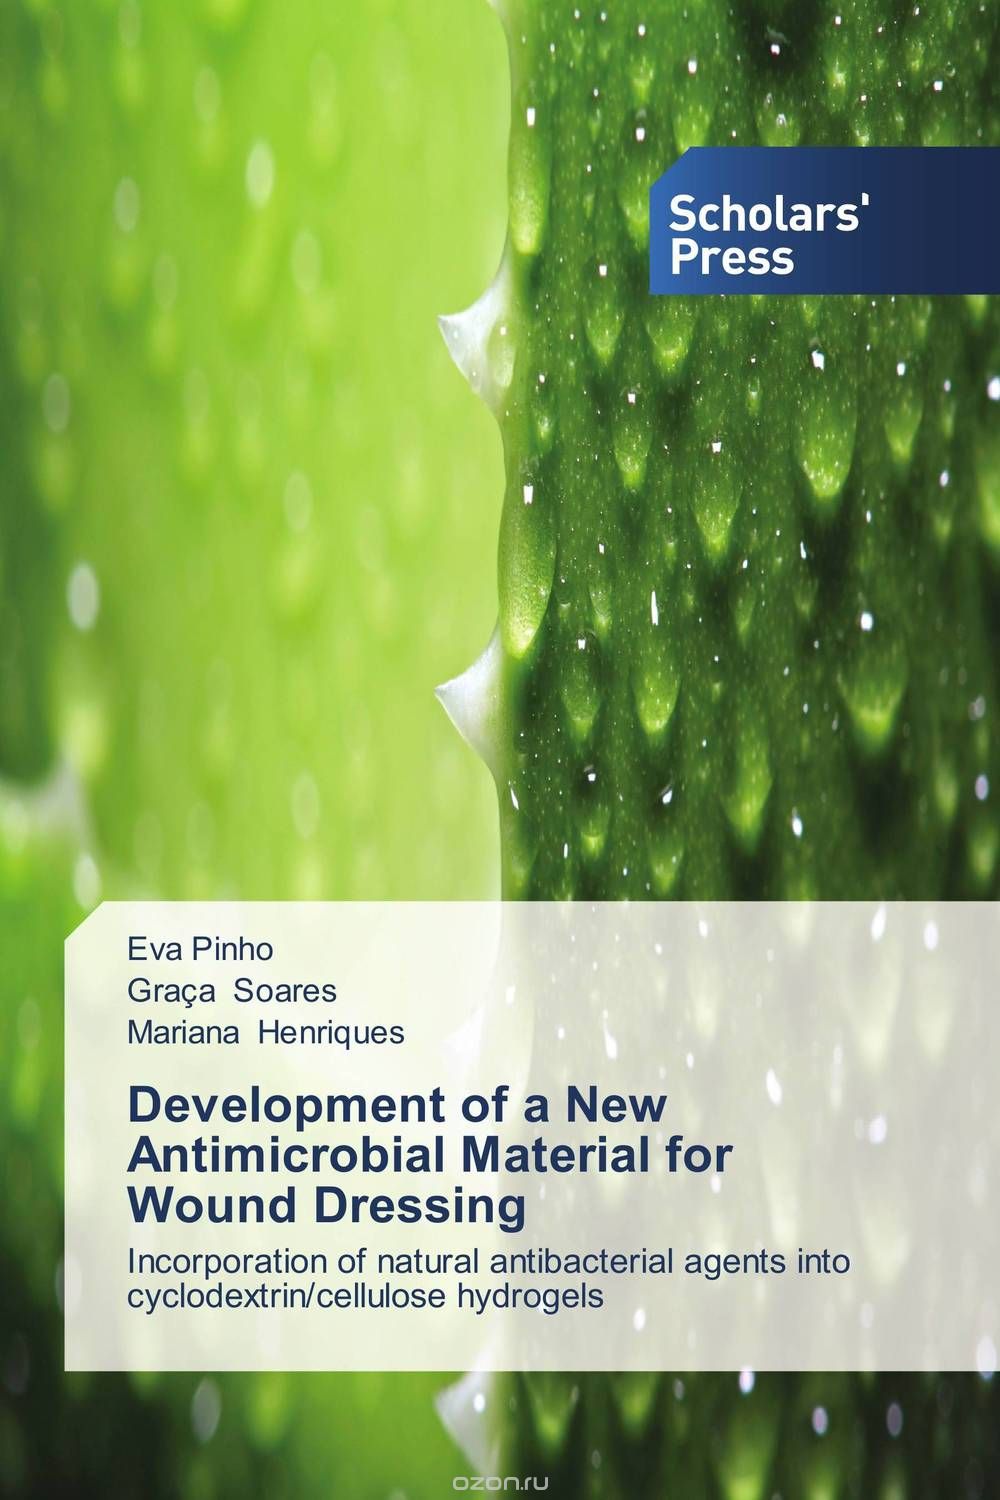 Скачать книгу "Development of a New Antimicrobial Material for Wound Dressing"